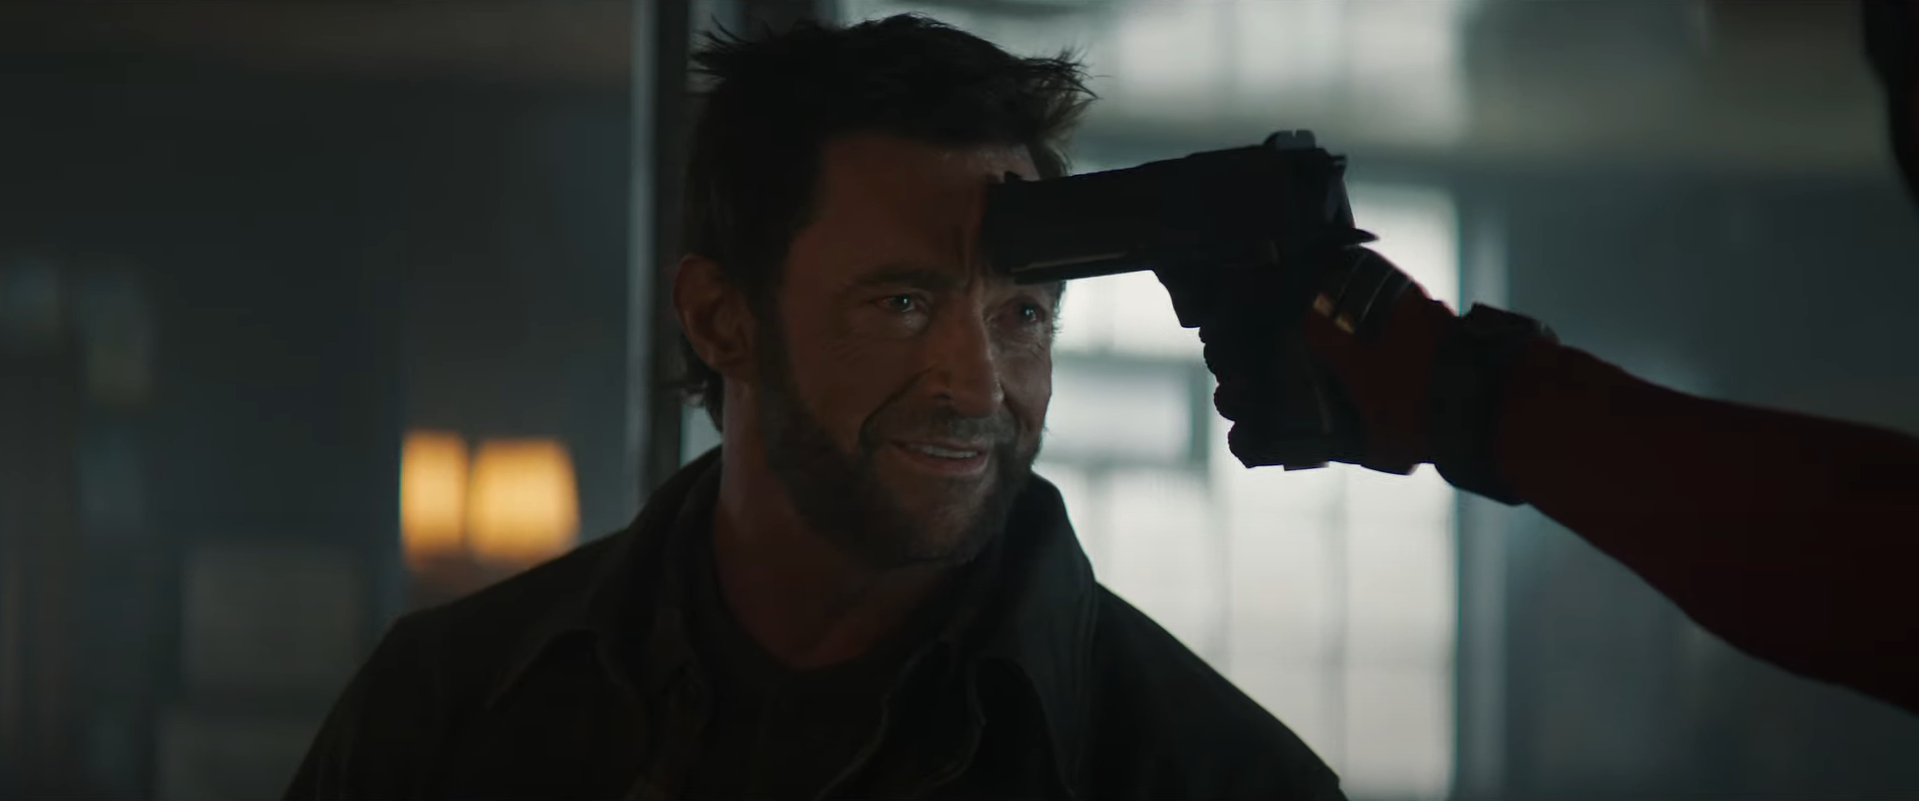 'Deadpool & Wolverine' Trailer Reveals New Look At Cameos and Villain